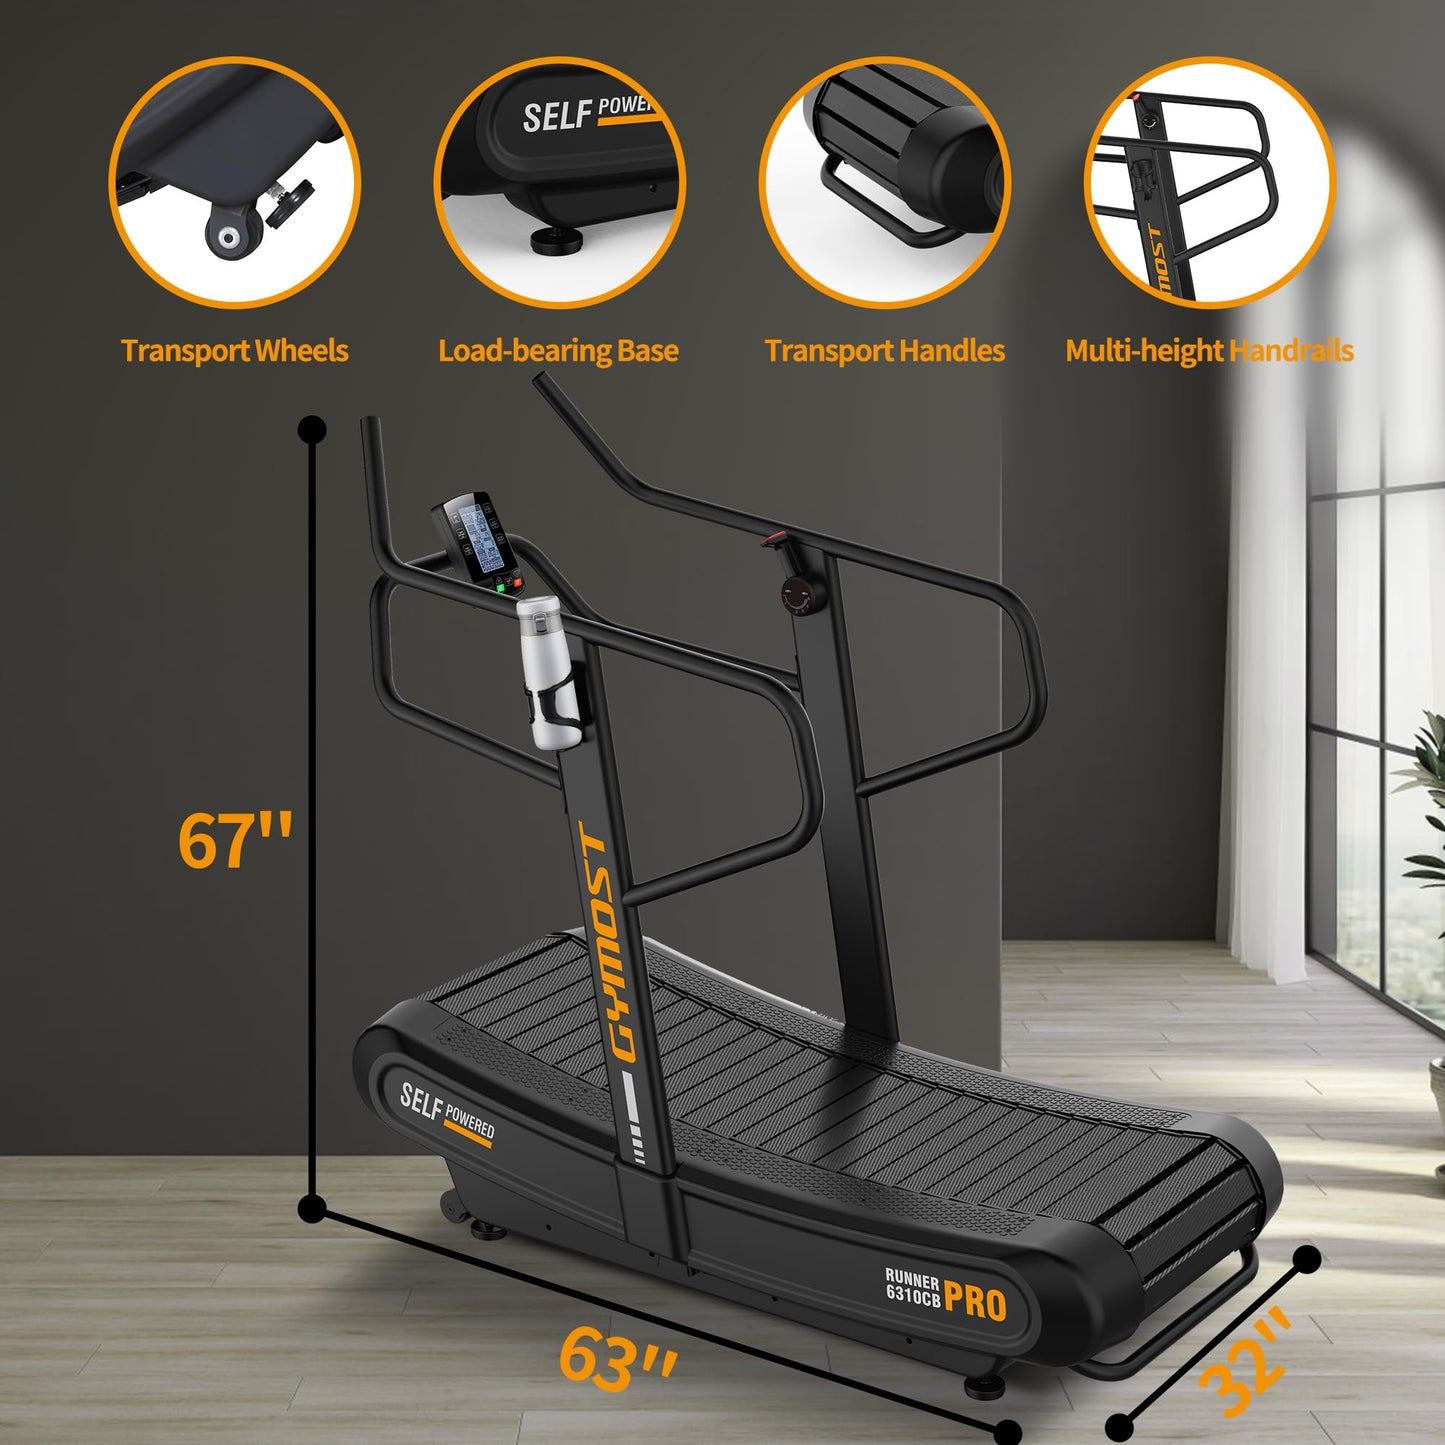 GYMOST Curved Treadmill, User Powered Air Runner, Non-Electric Motorized Treadmill with 4 Resistance Levels Adjustment Great for Gym and Home Running